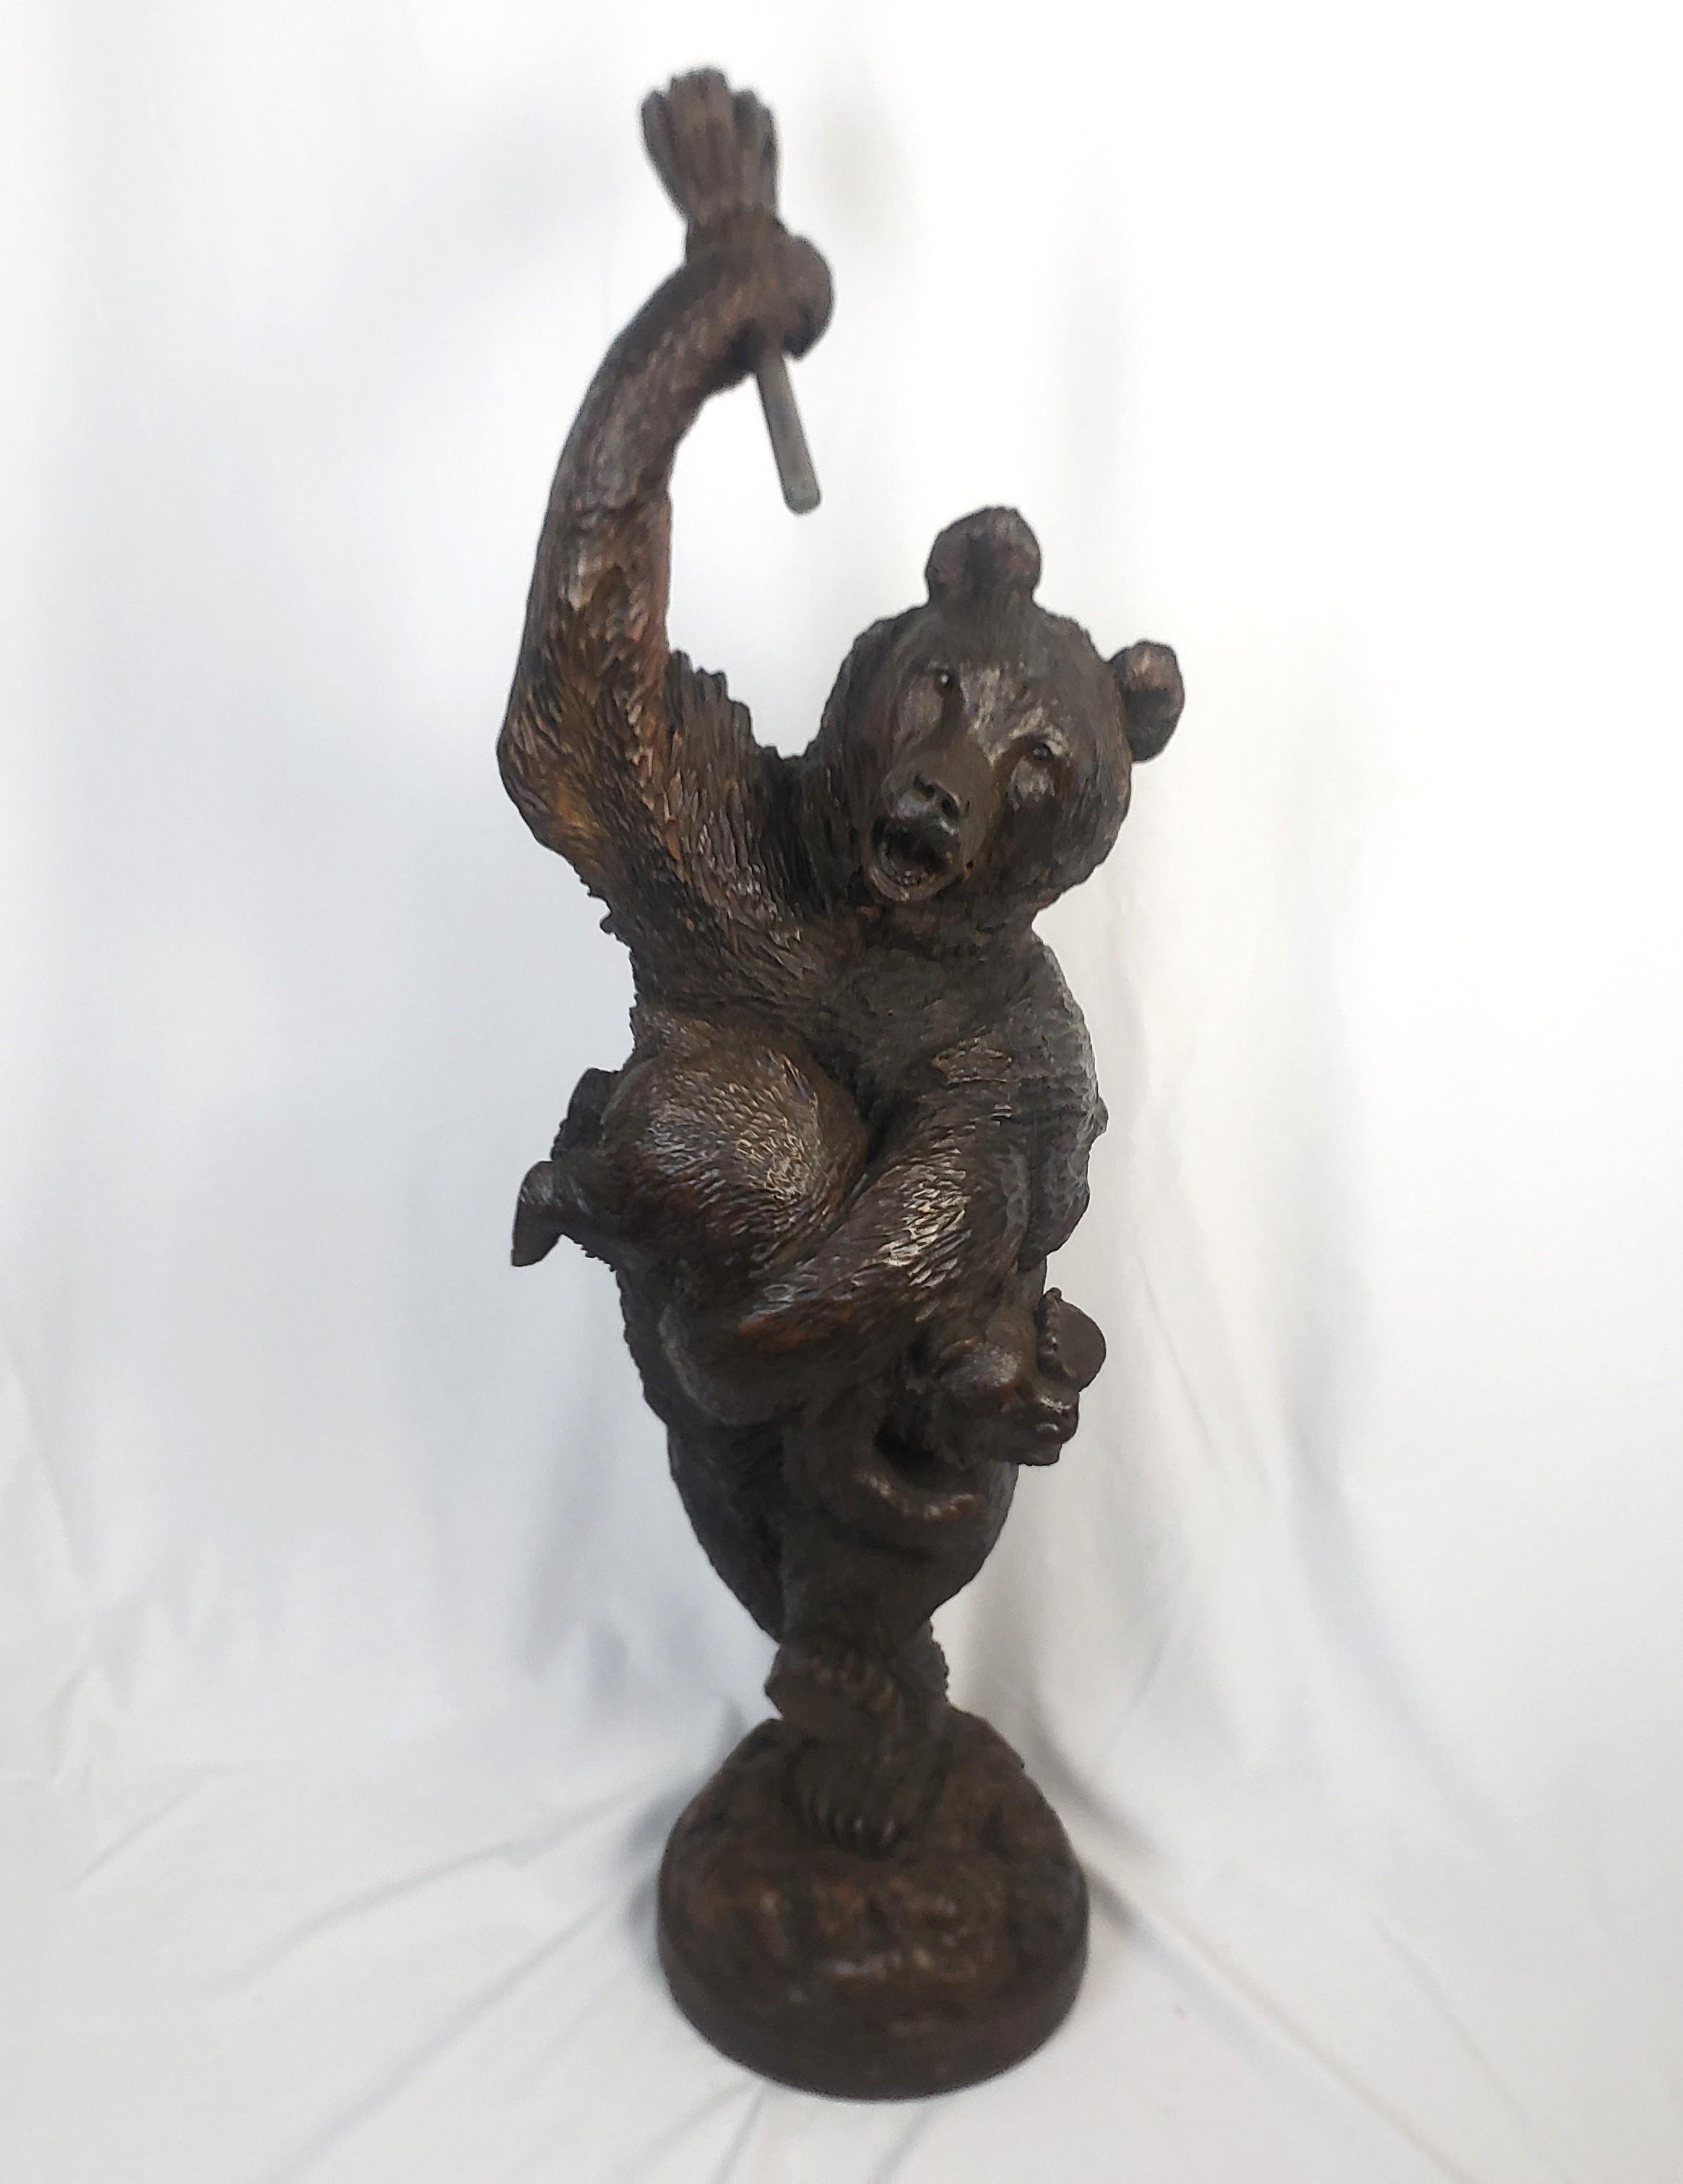 This sizeable antique folk art carving is unsigned, but presumed to have originated from the Brienz area of Switzerland and date to approximately 1880 and done in the period Black Forest style. The carving is done in pine and depicts and standing